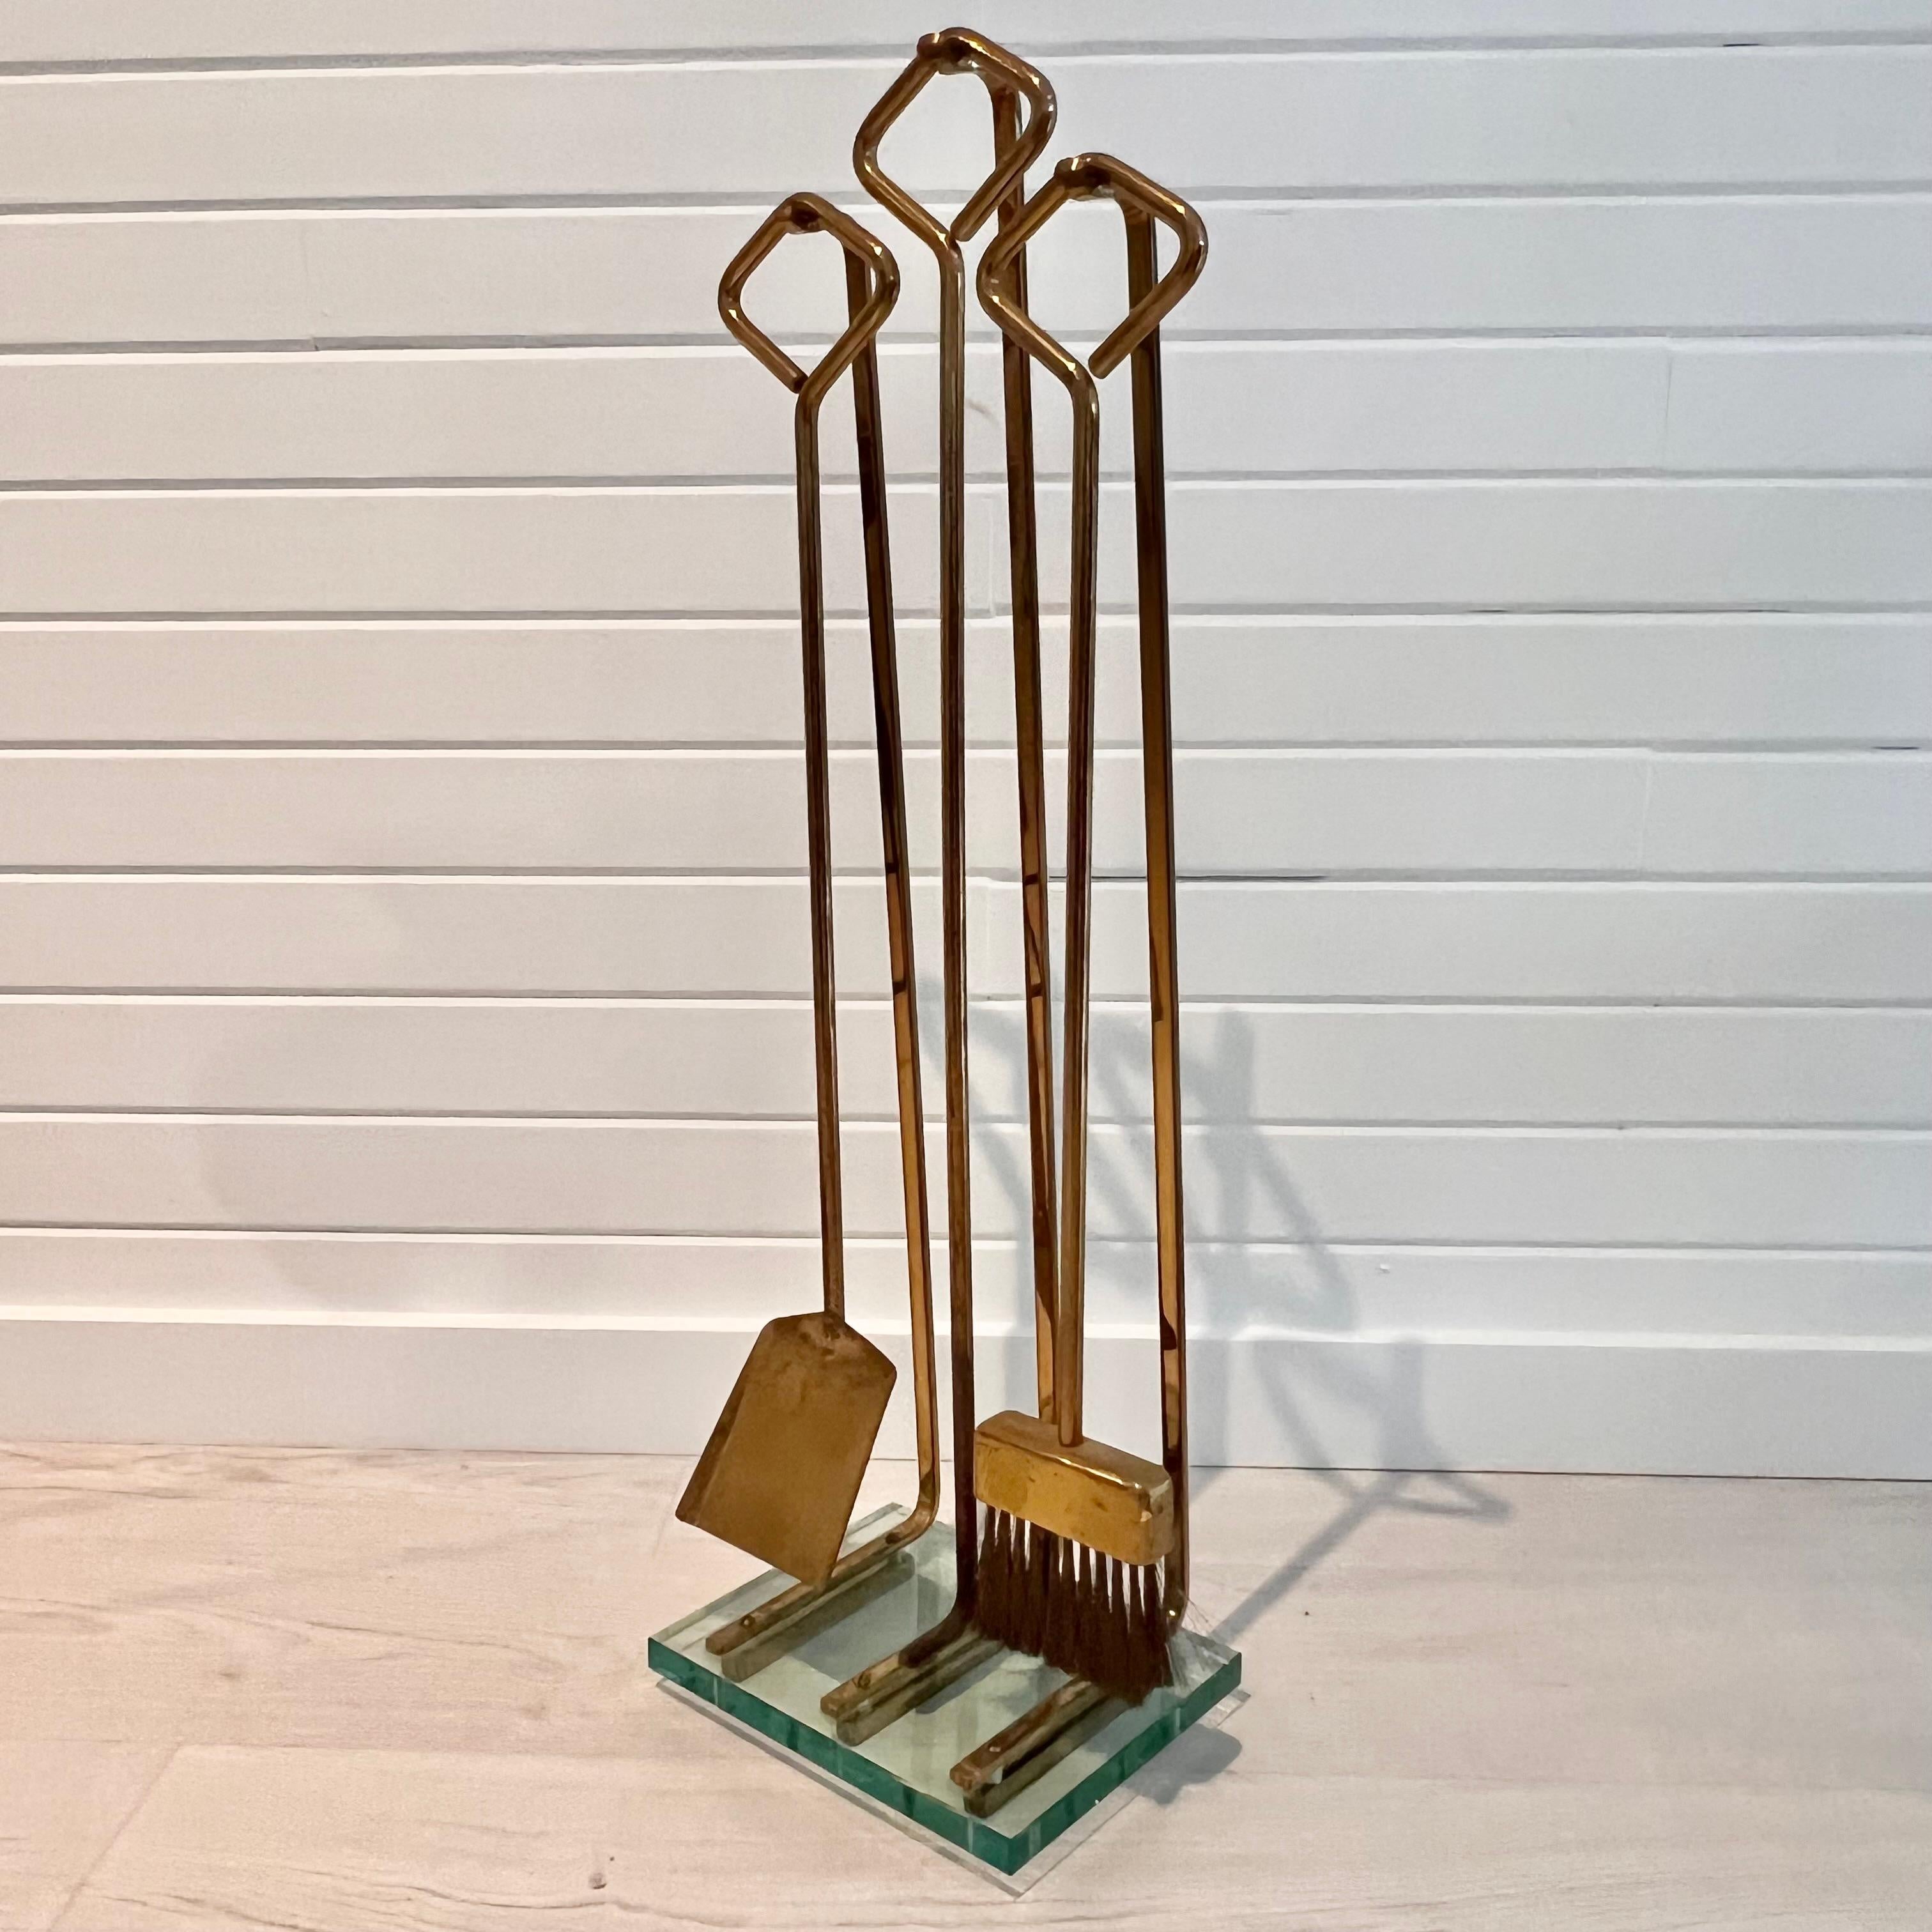 Elegant mid-century modern fireplace tool set by Fontana Arte, circa 1970’s. Set includes shovel, poker and broom. Original brass bristles on broom. The set is executed in brass, with each handle fitted with a diamond-shaped, bent-brass handle,